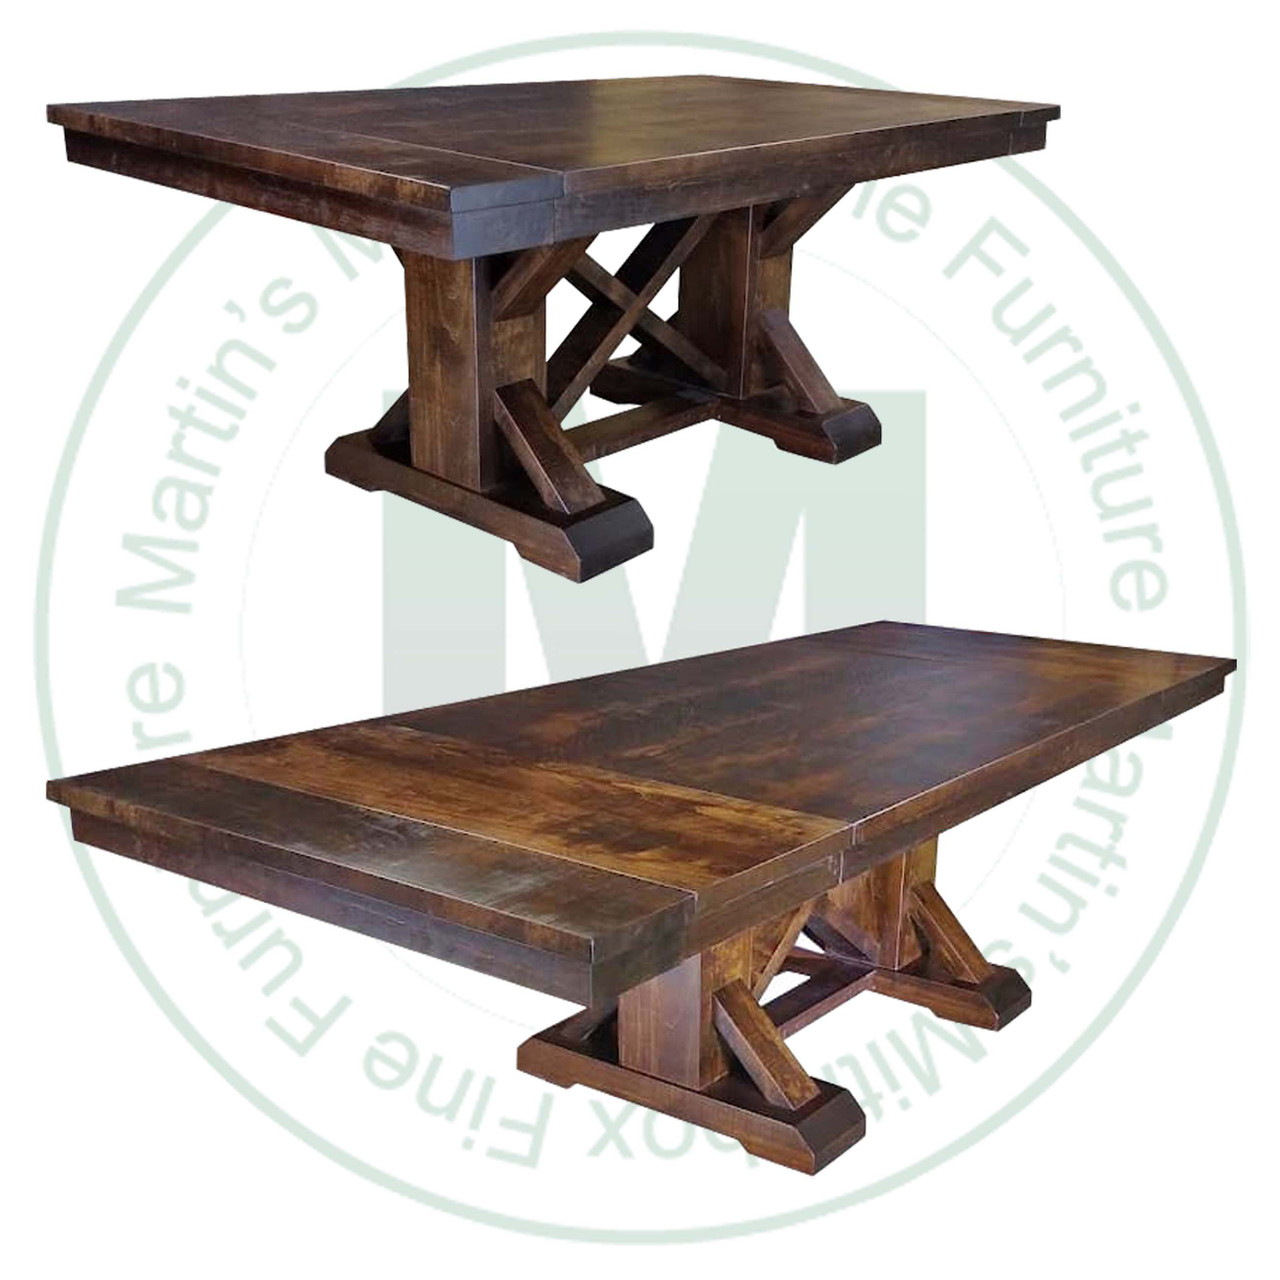 Wormy Maple Bonanza End Extension Pedestal Table 48'' Deep x 60'' Wide x 30'' High With 2 - 16'' End Leaves